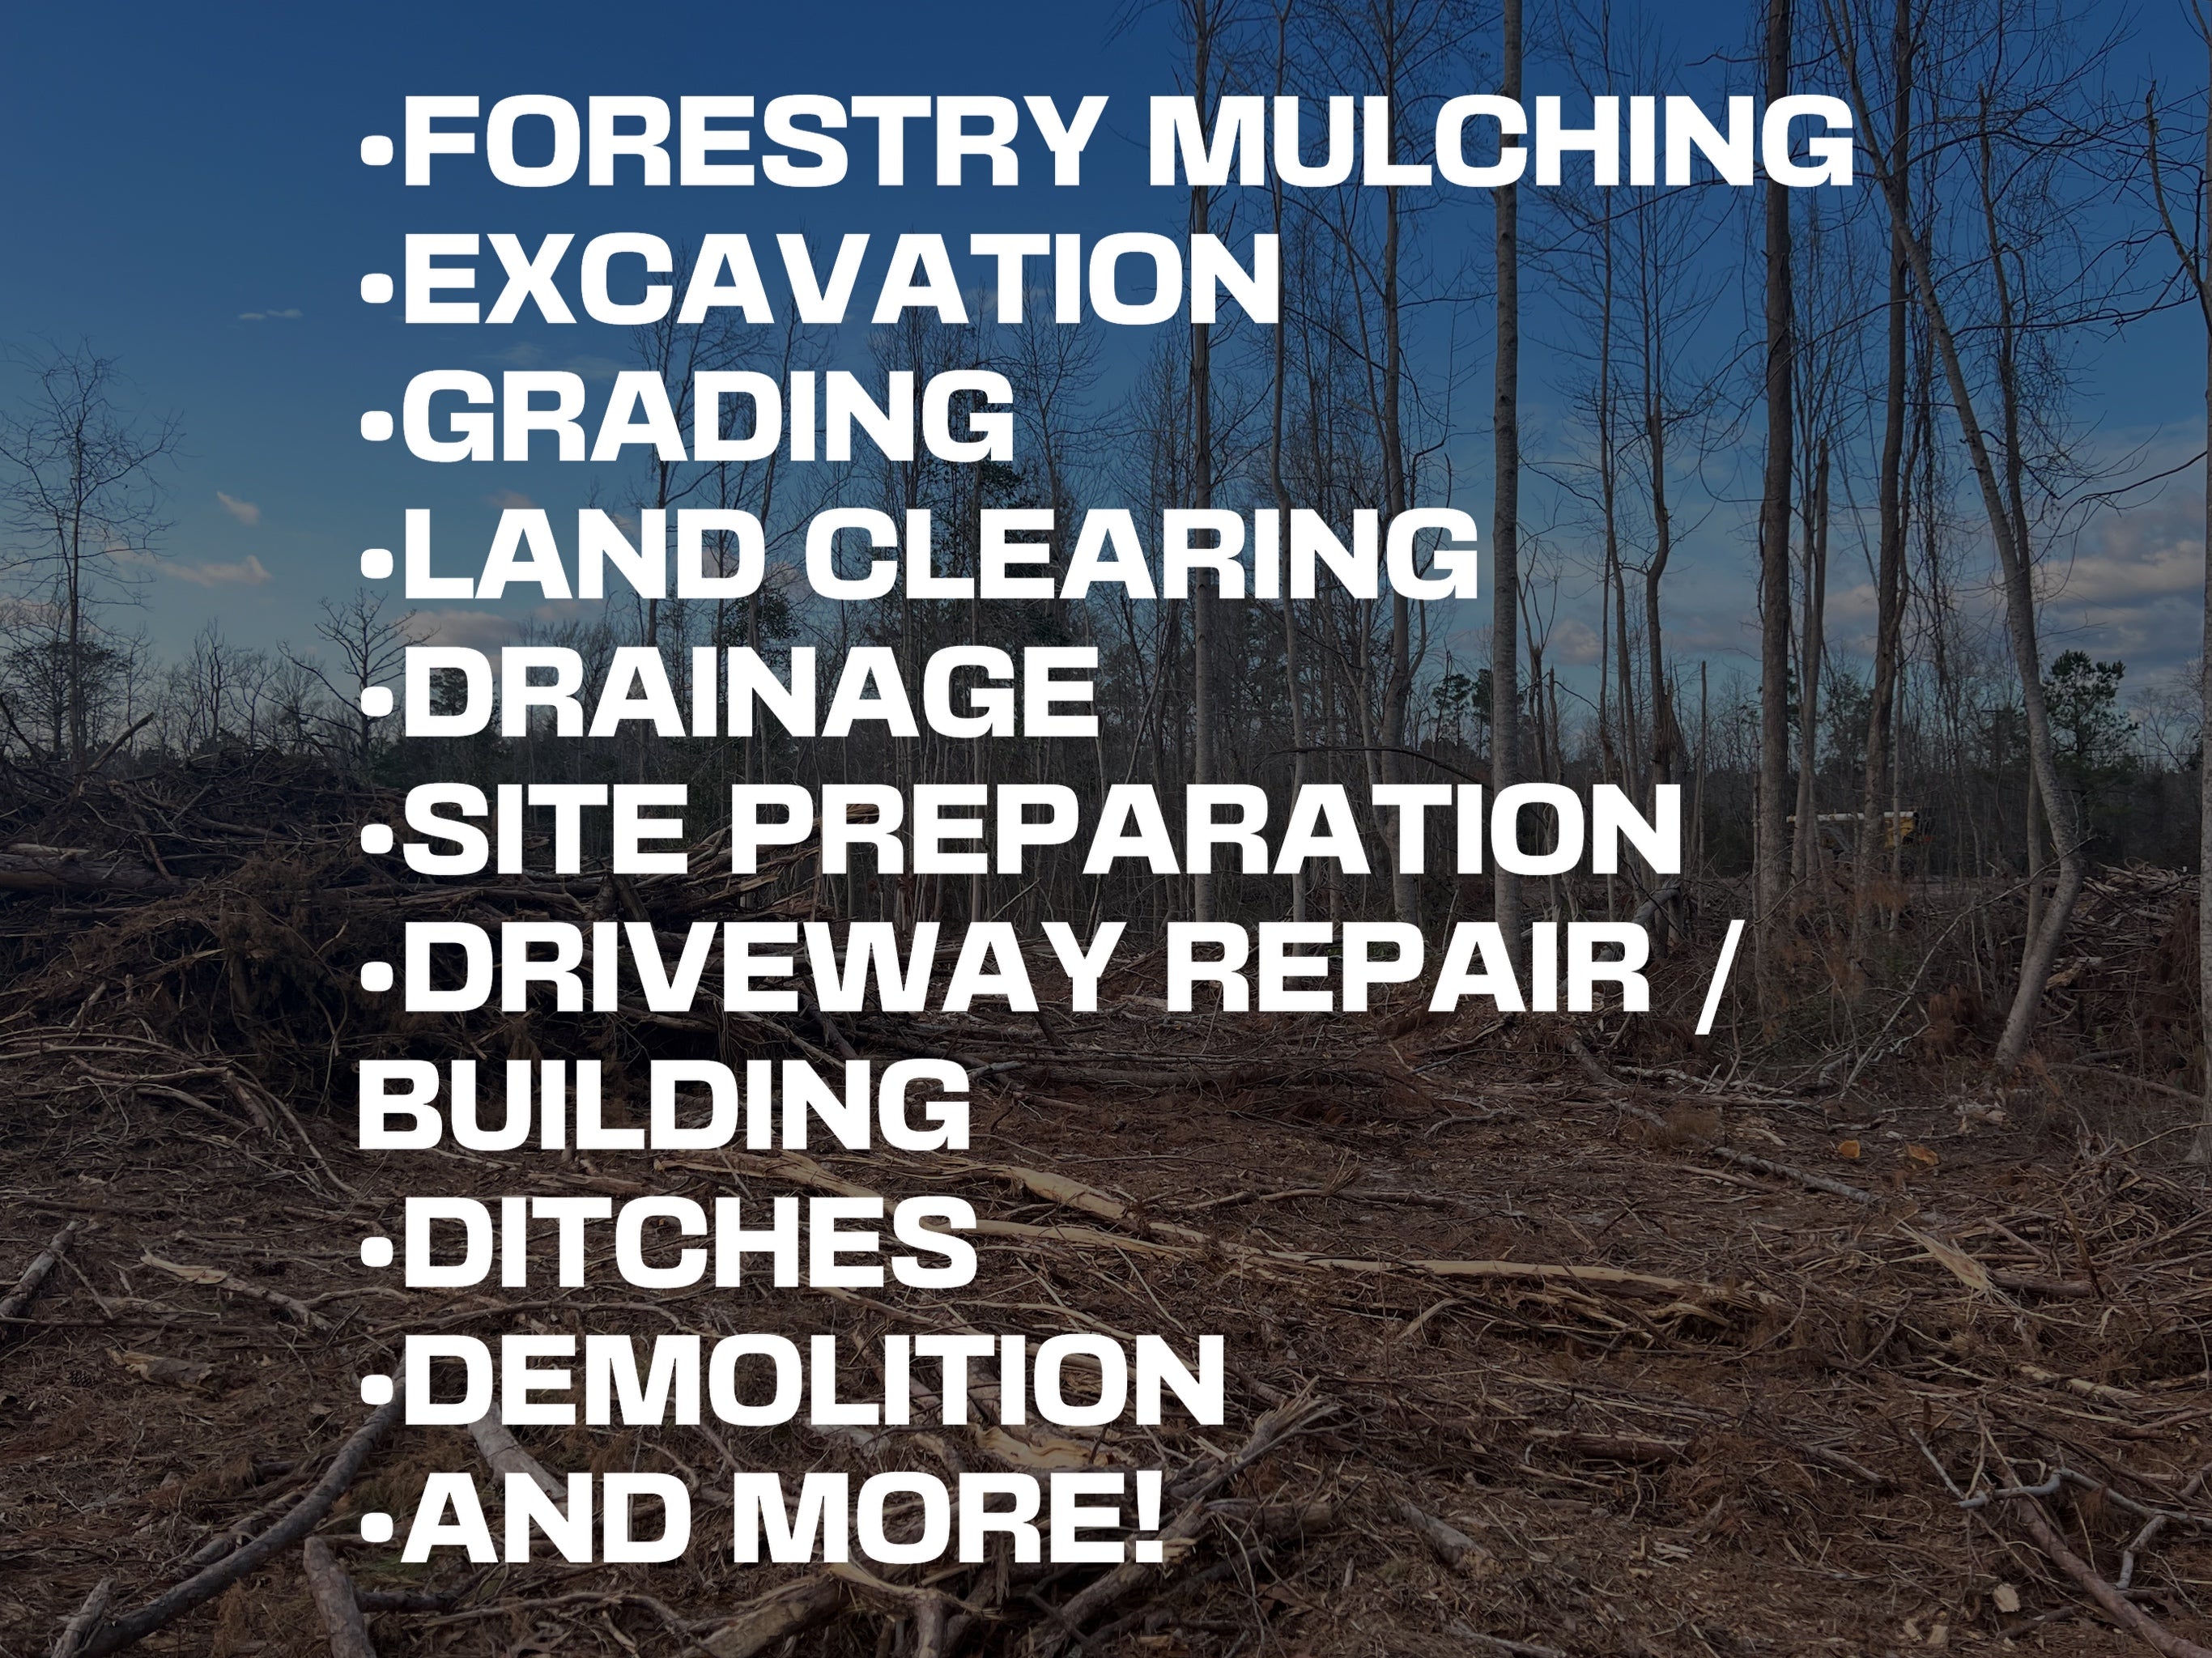 Carolina EarthWerx offers forestry mulching, excavation, grading, drainage, land clearing, demolition, and site preparation services in Eastern North Carolina.